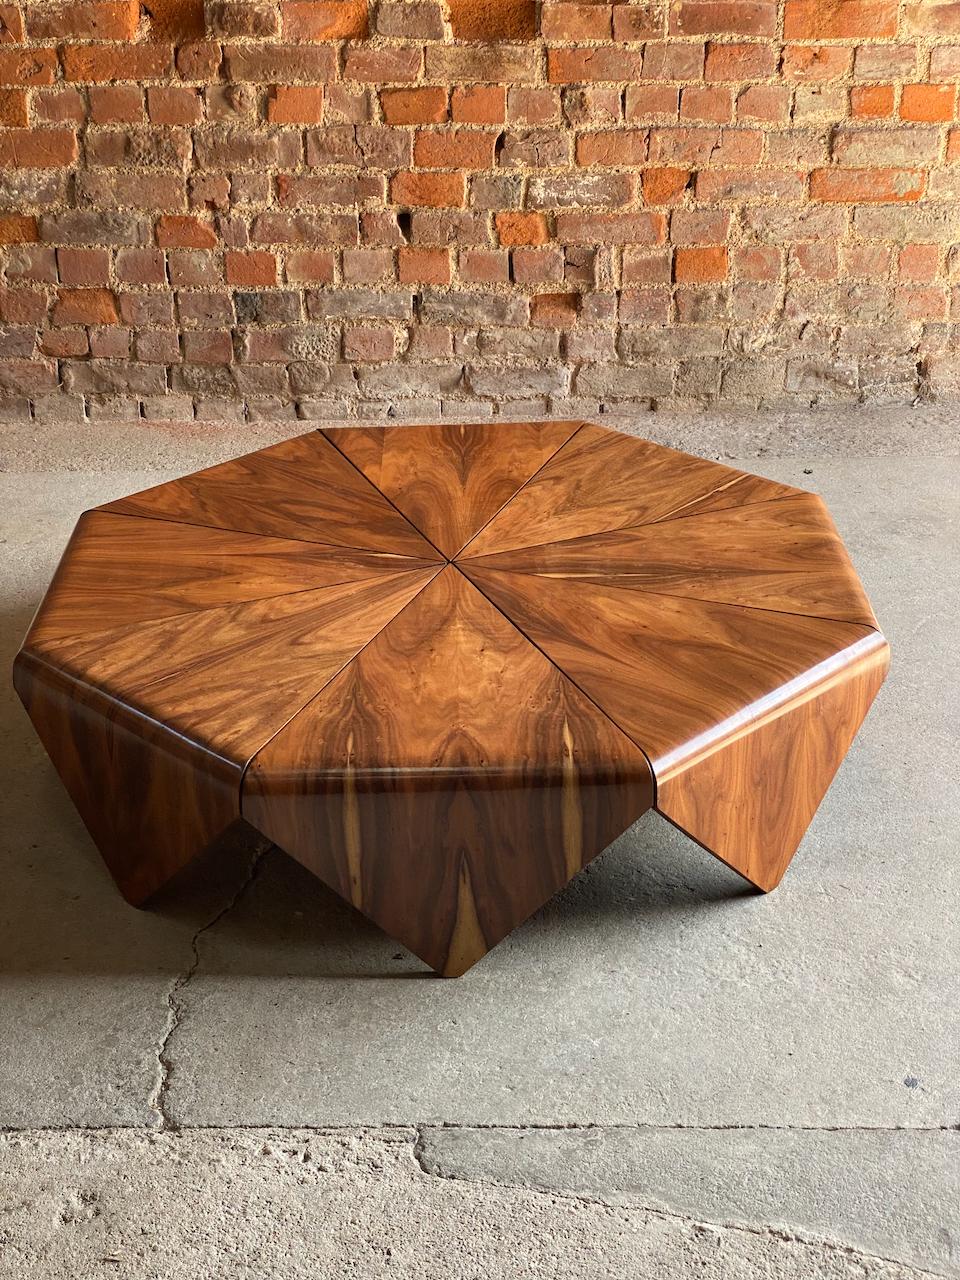 Jorge Zalszupin Petals Rosewood Coffee Table by L' Atelier circa 1965.

Magnificent mid century Jorge Zalszupin ‘Petals' Jacaranda Rosewood coffee table manufactured by L' Atelier circa 1965, the octagonal Petals coffee table was inspired by the